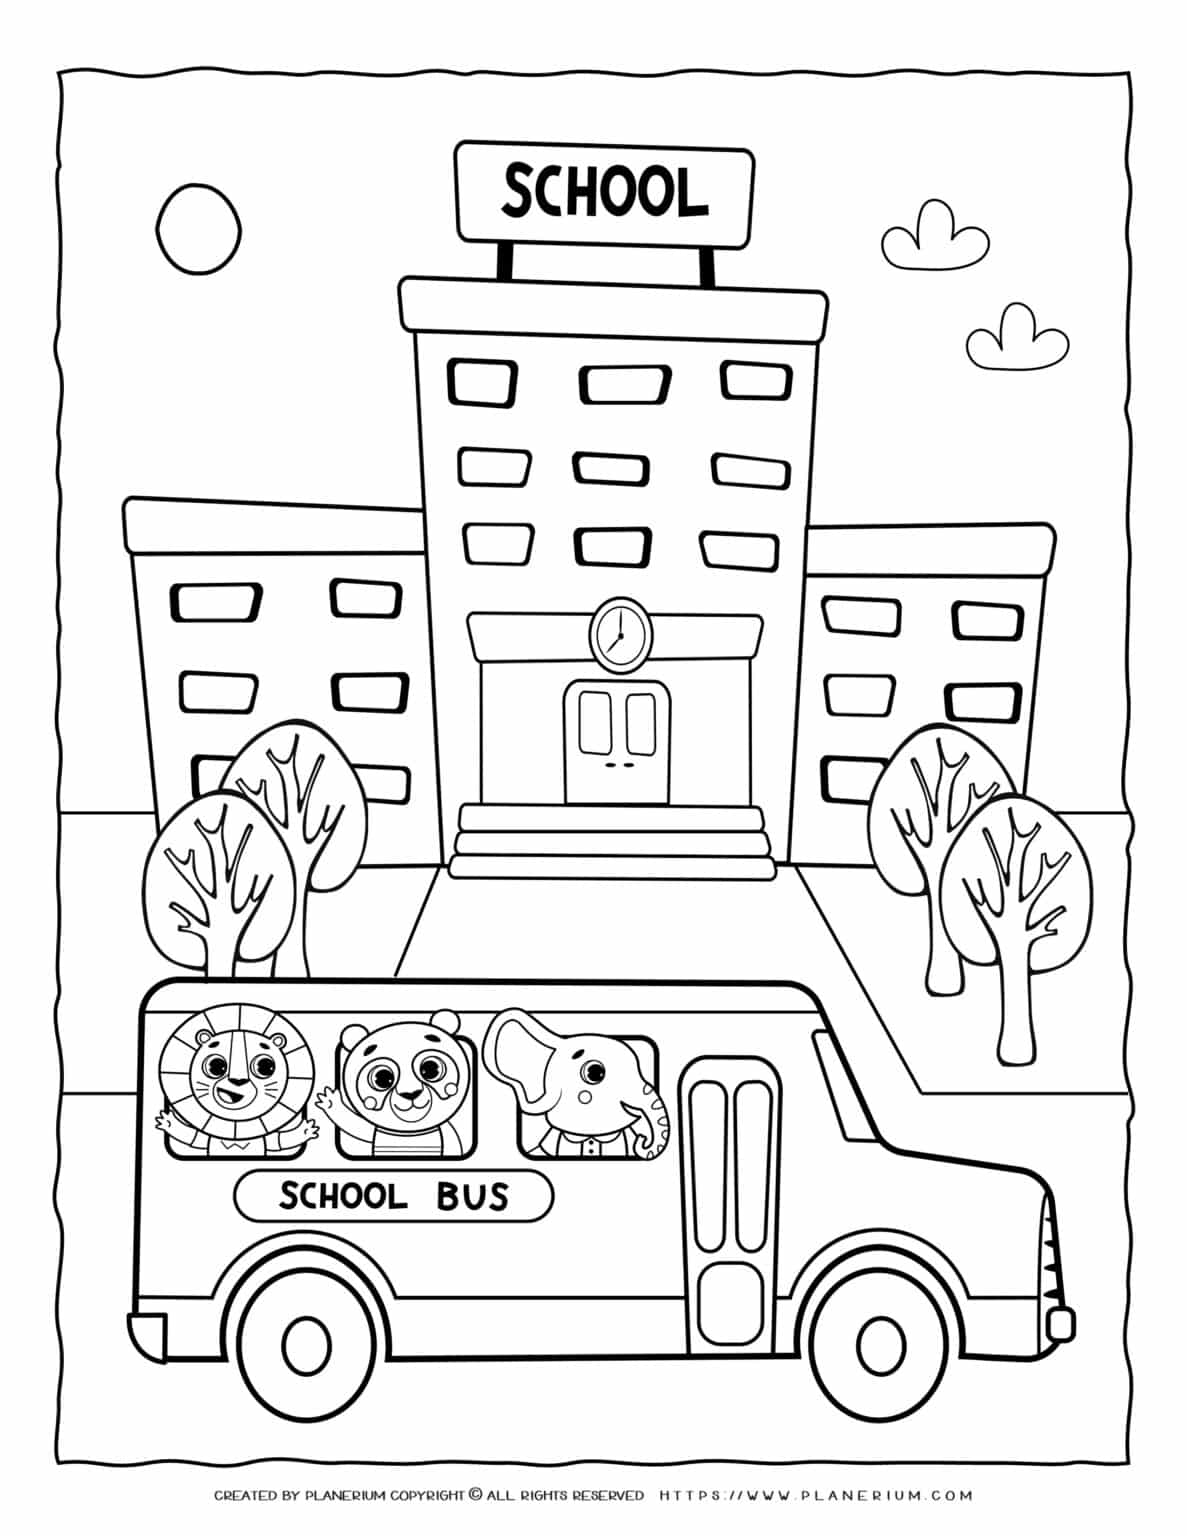 school-bus-coloring-page-for-kids